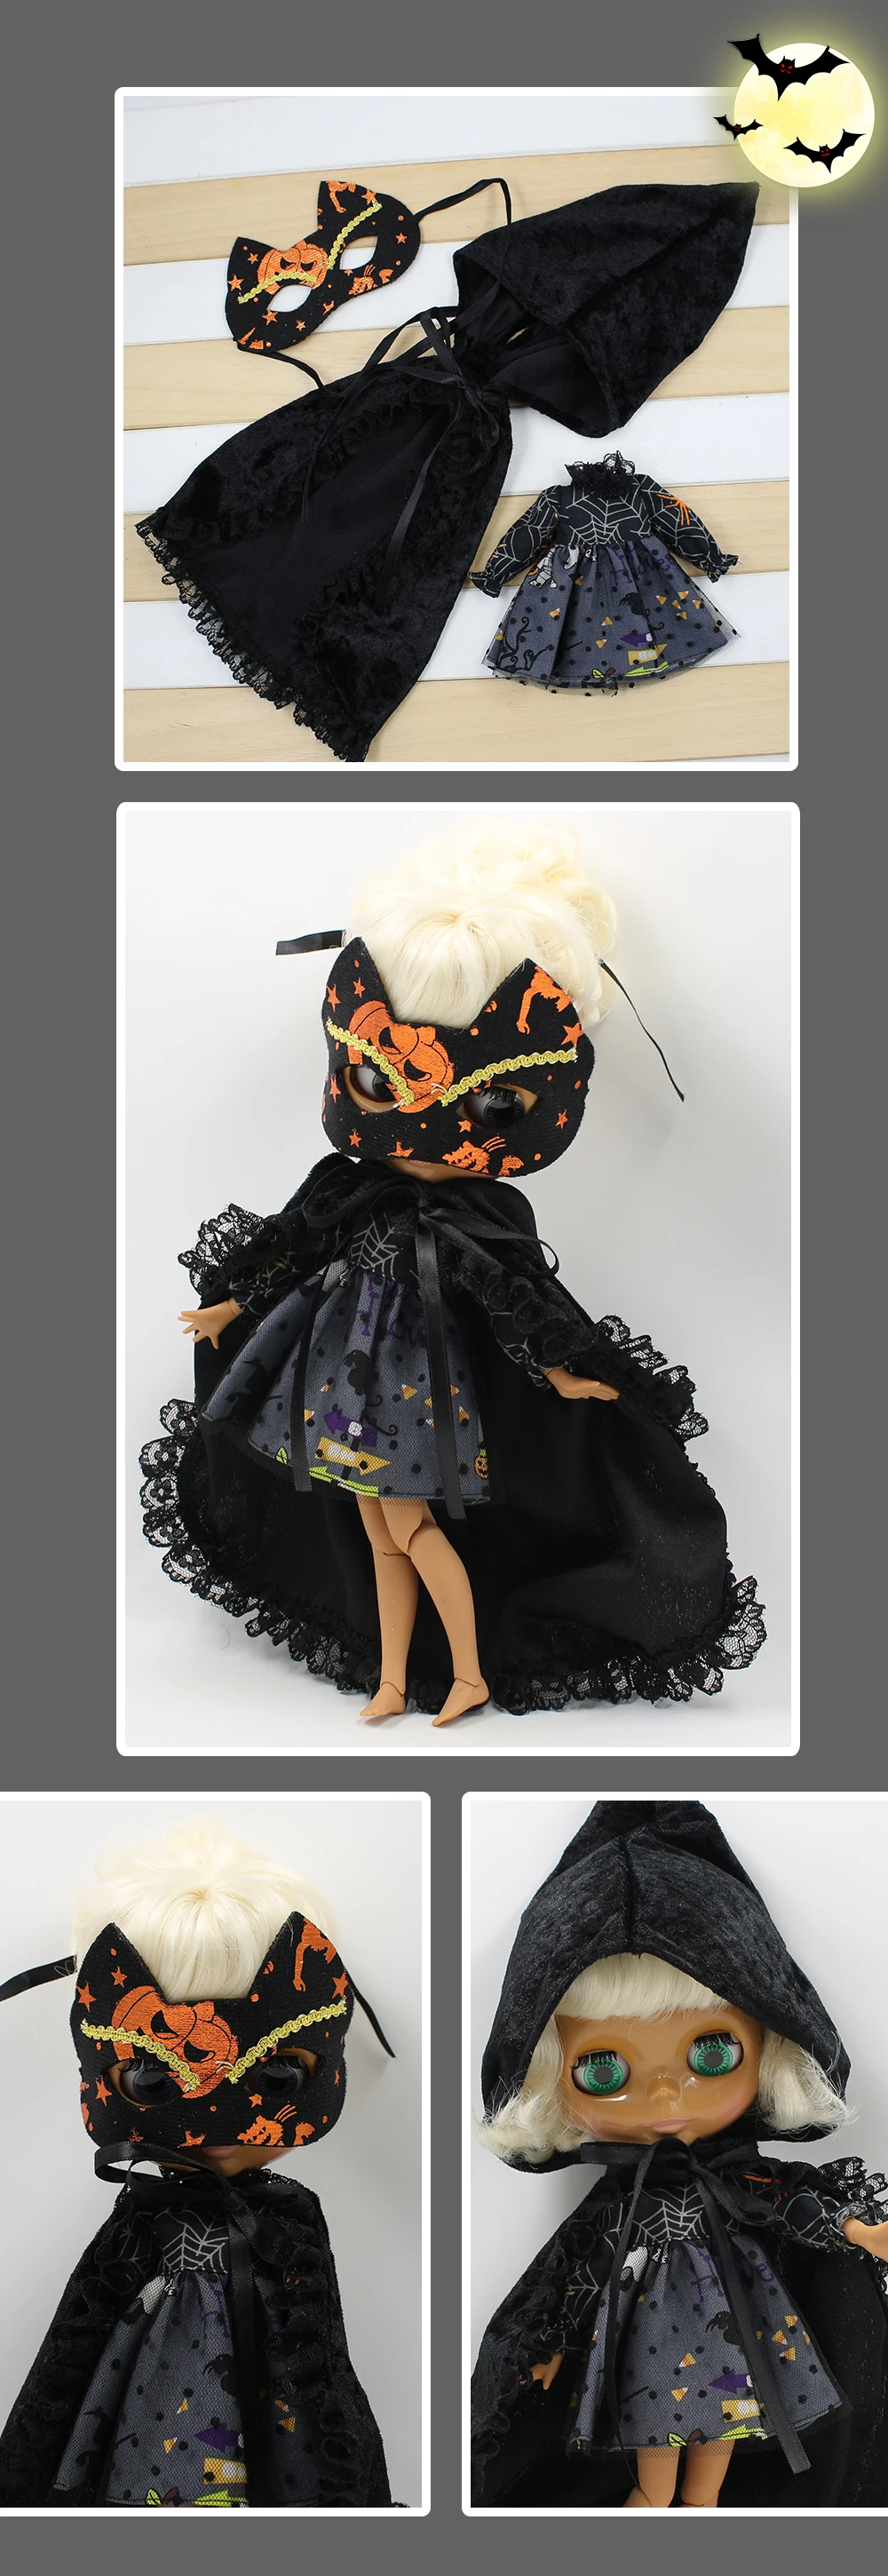 Neo Blythe Doll Halloween Clothes, Costumes & Dresses 2